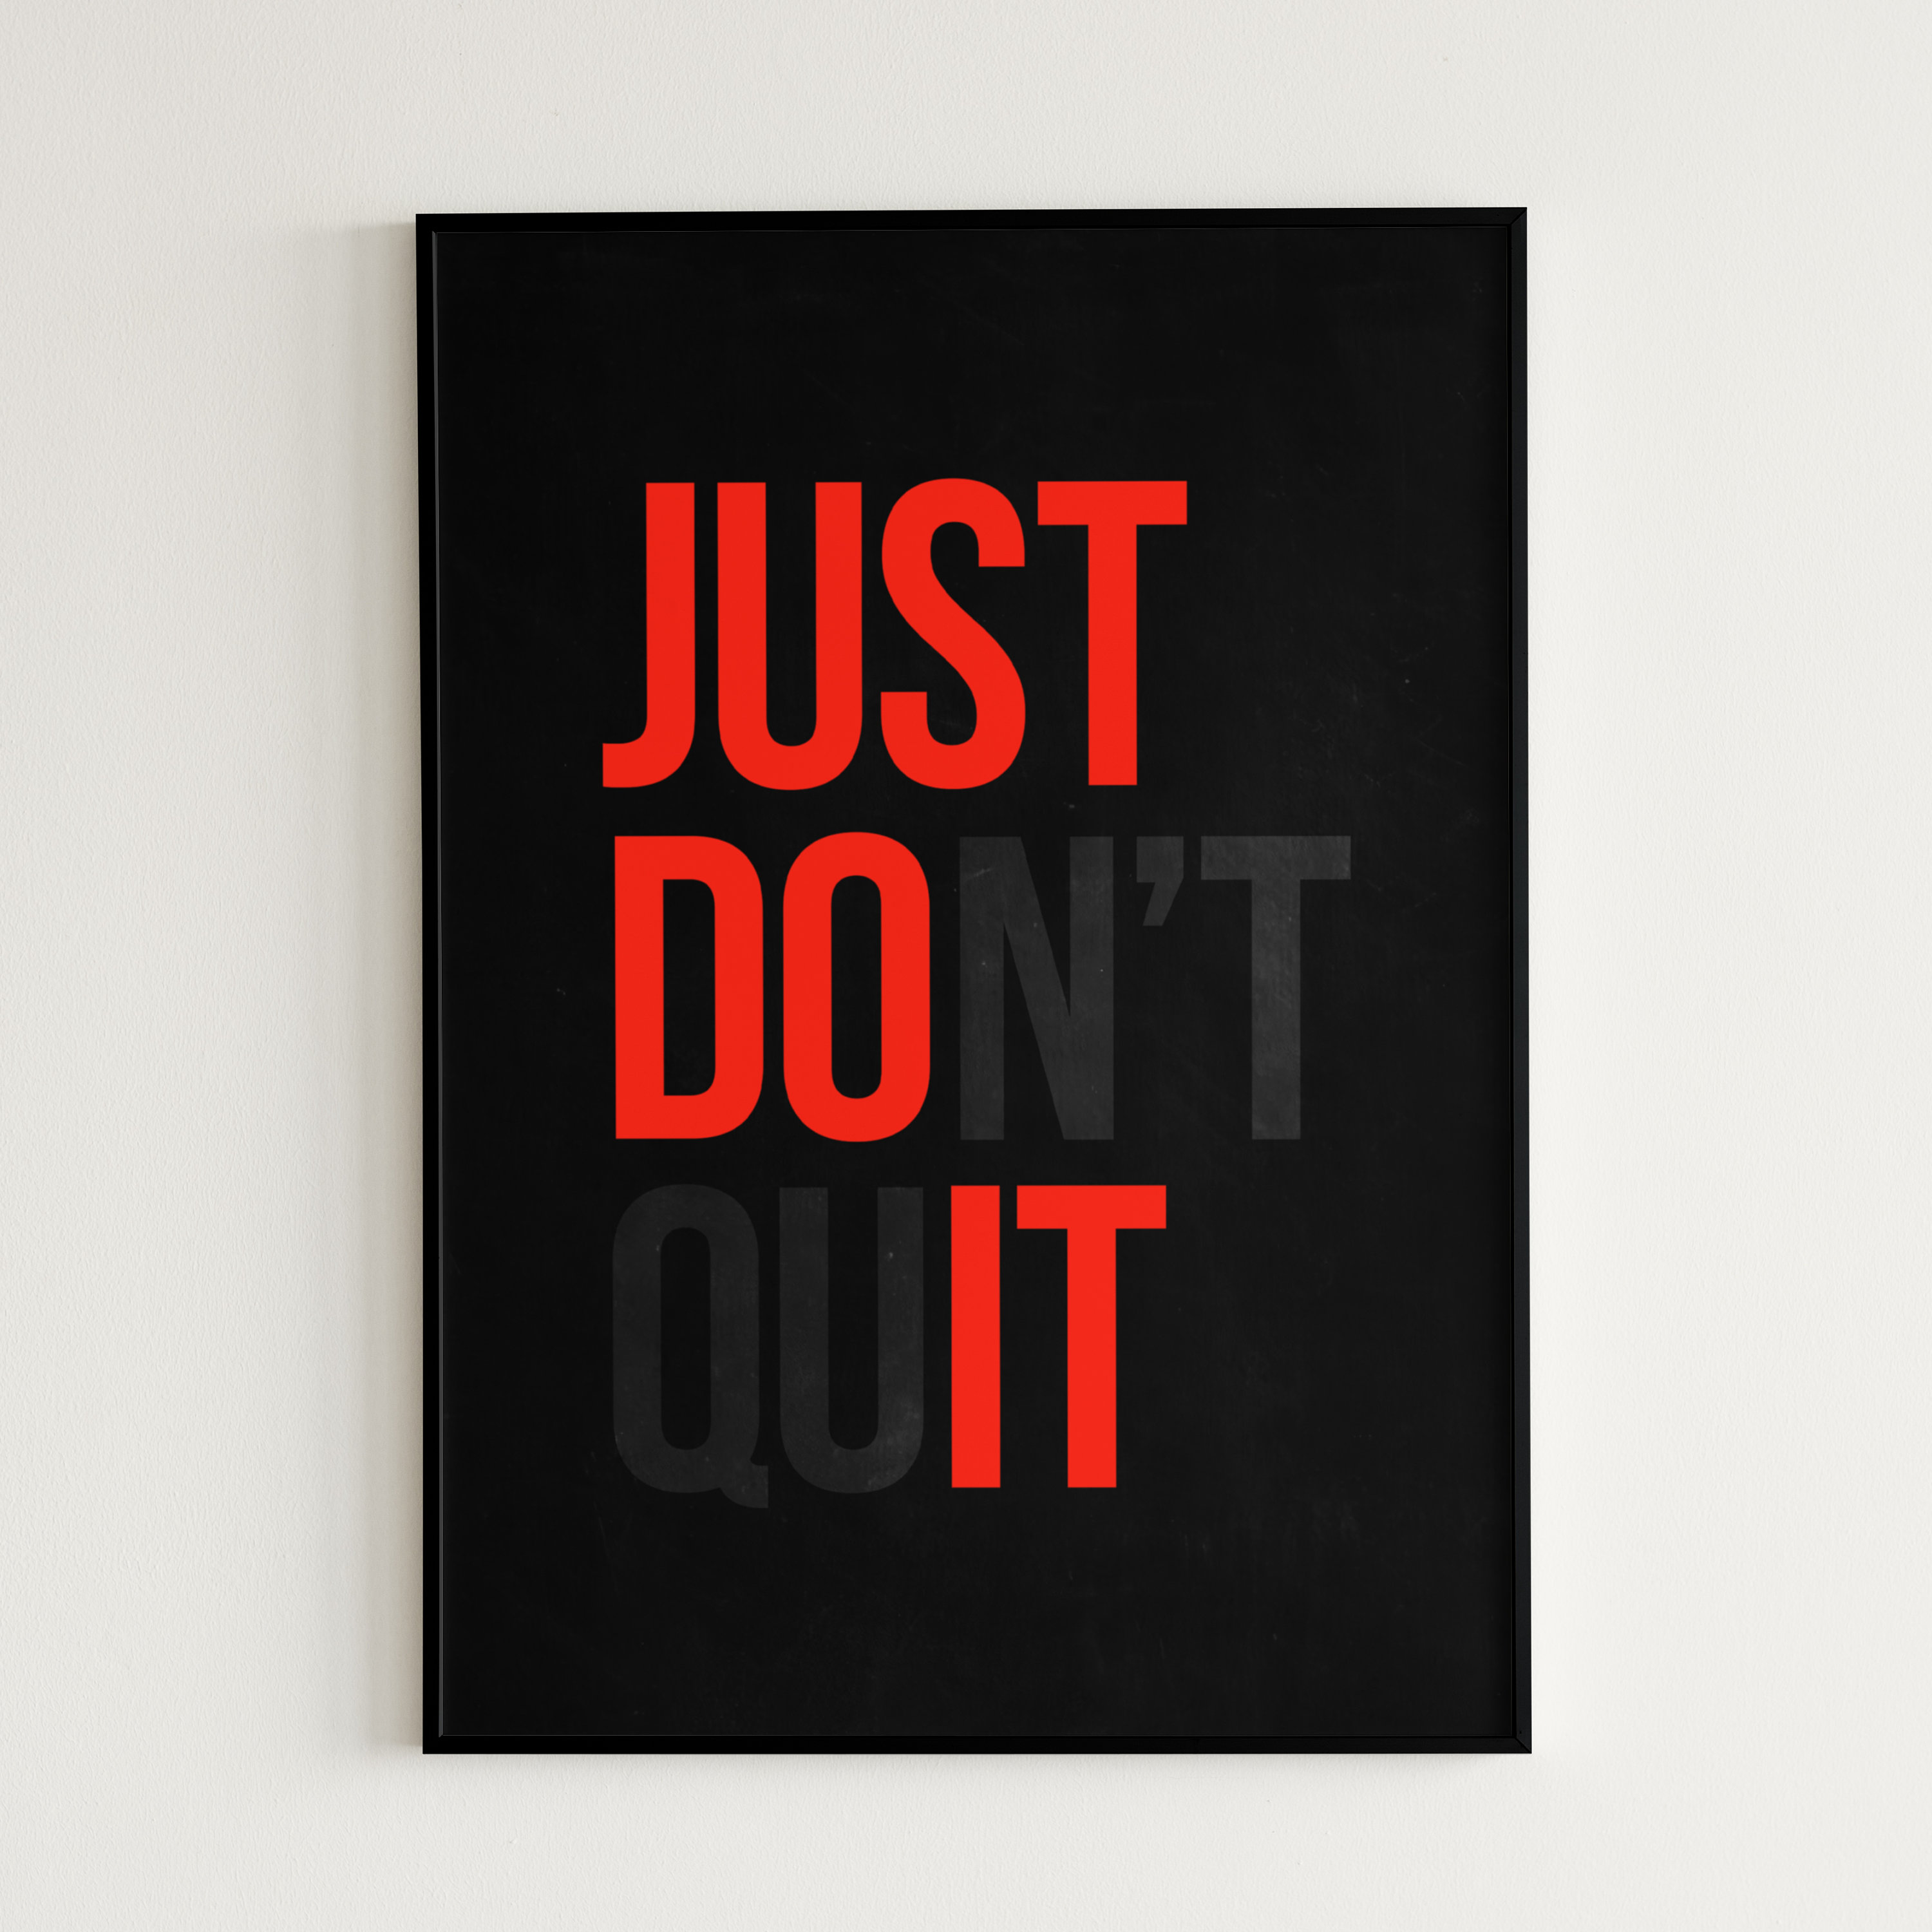 Just Don't Quit - Etsy